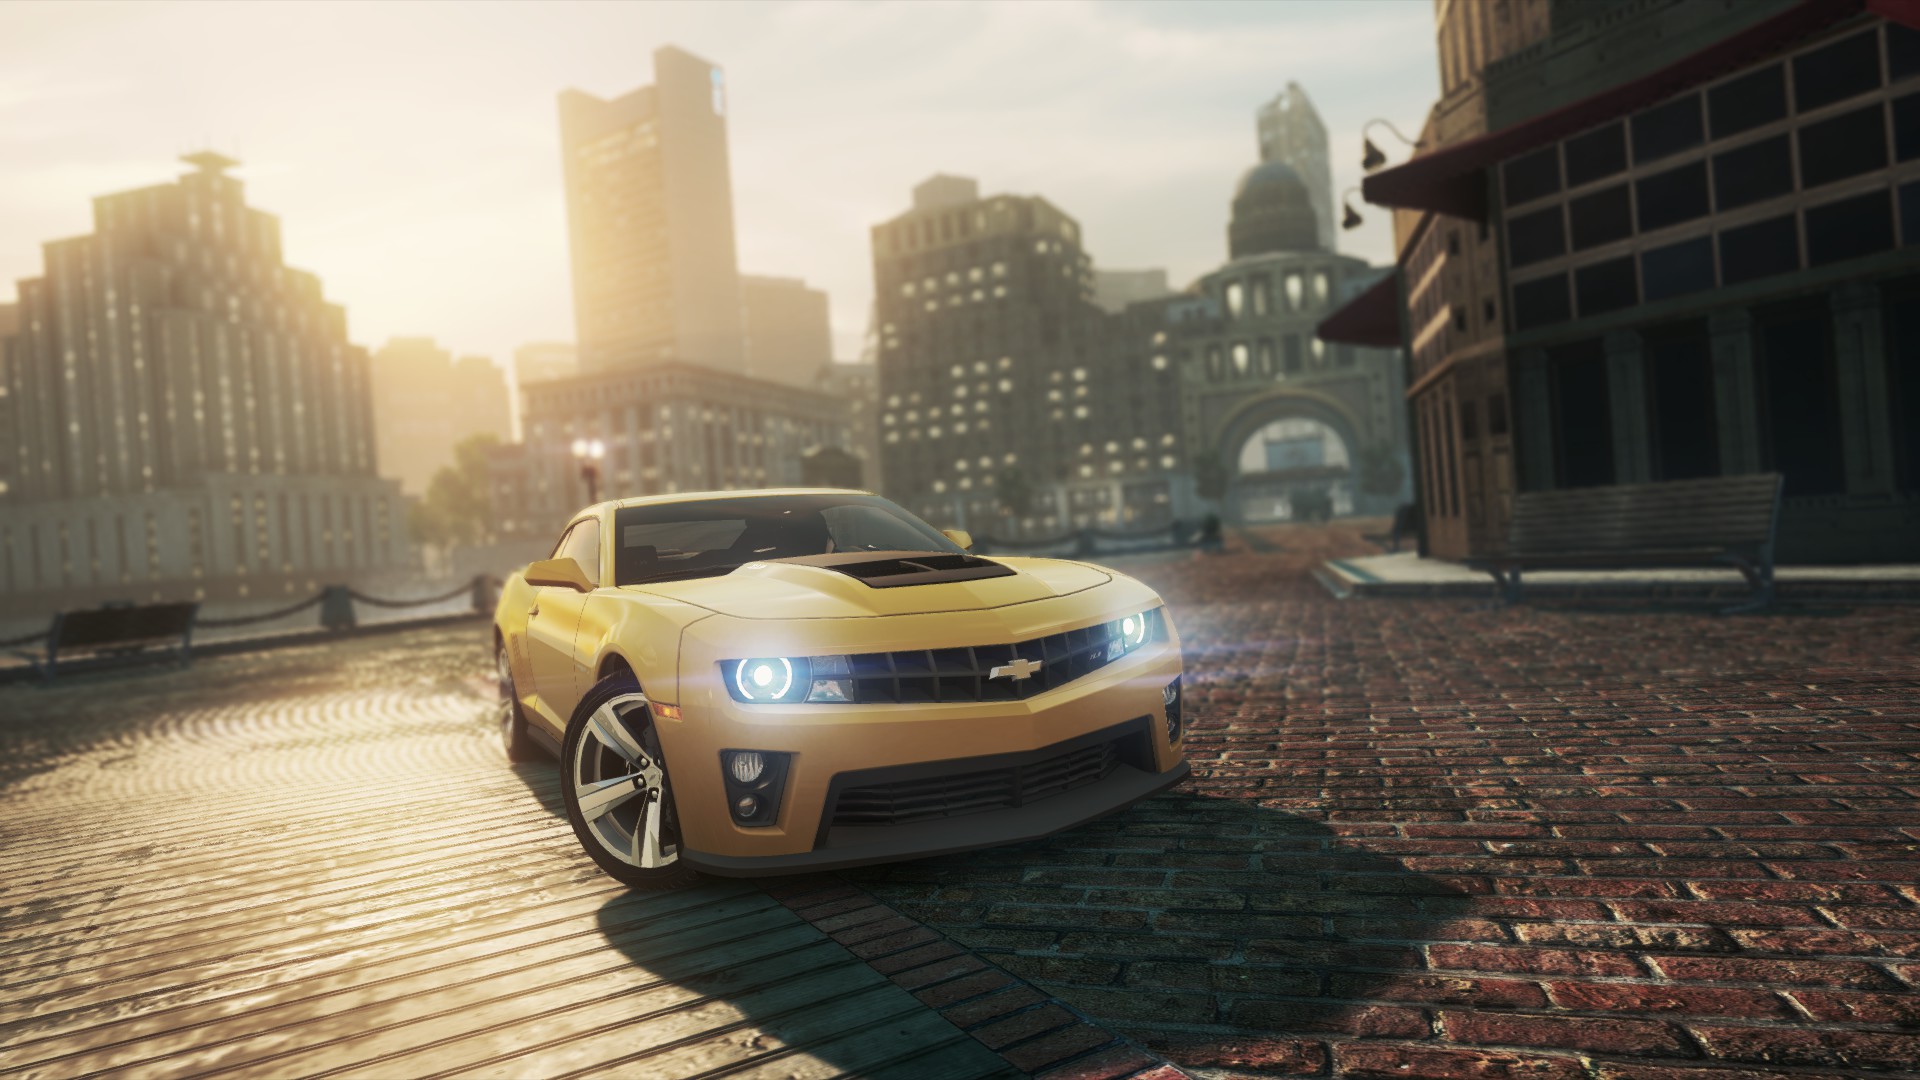 General 1920x1080 Need for Speed Need for Speed: Most Wanted Chevrolet muscle cars Electronic Arts vehicle Chevrolet Camaro building frontal view headlights American cars sunlight video games car sky video game art screen shot yellow cars